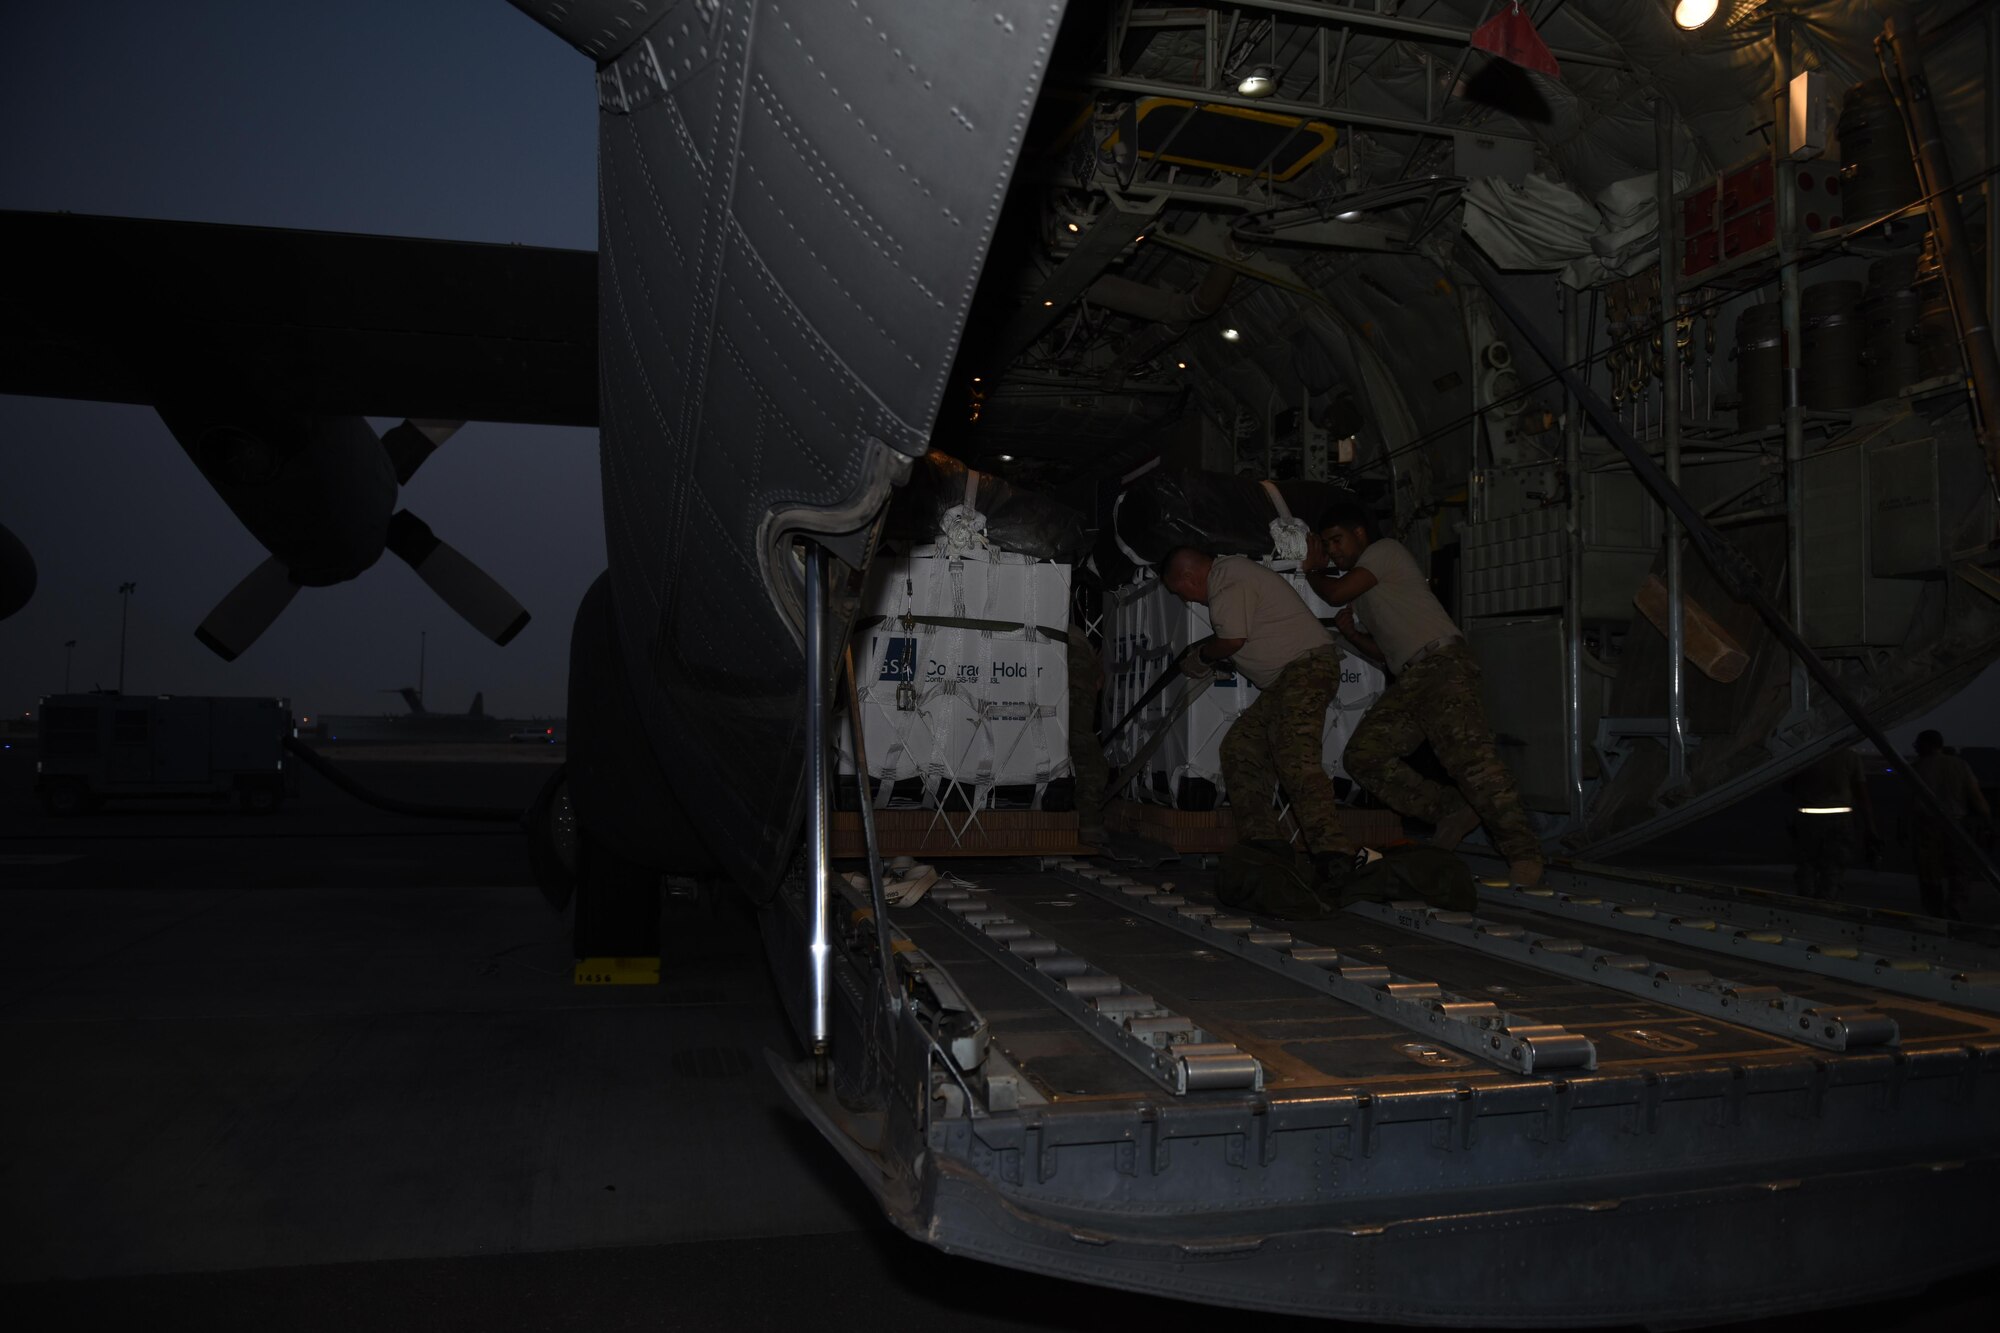 Loadmasters with the 737th Expeditionary Airlift Squadron work together to secure a container delivery system in the cargo bay of a C-130 Hercules in preparation for an air drop at an undisclosed location in Southwest Asia, over the weekend. Providing the fuel that keeps the fight going, the 386th Air Expeditionary Wing has delivered more than 80 tons of food, water and other supplies to various supported forces throughout the U.S. Air Forces Central Command area of responsibility in support of Combined Joint Task Force - Operation Inherent Resolve ground troops. (U.S. Air Force photo/Tech. Sgt. Jonathan Hehnly)